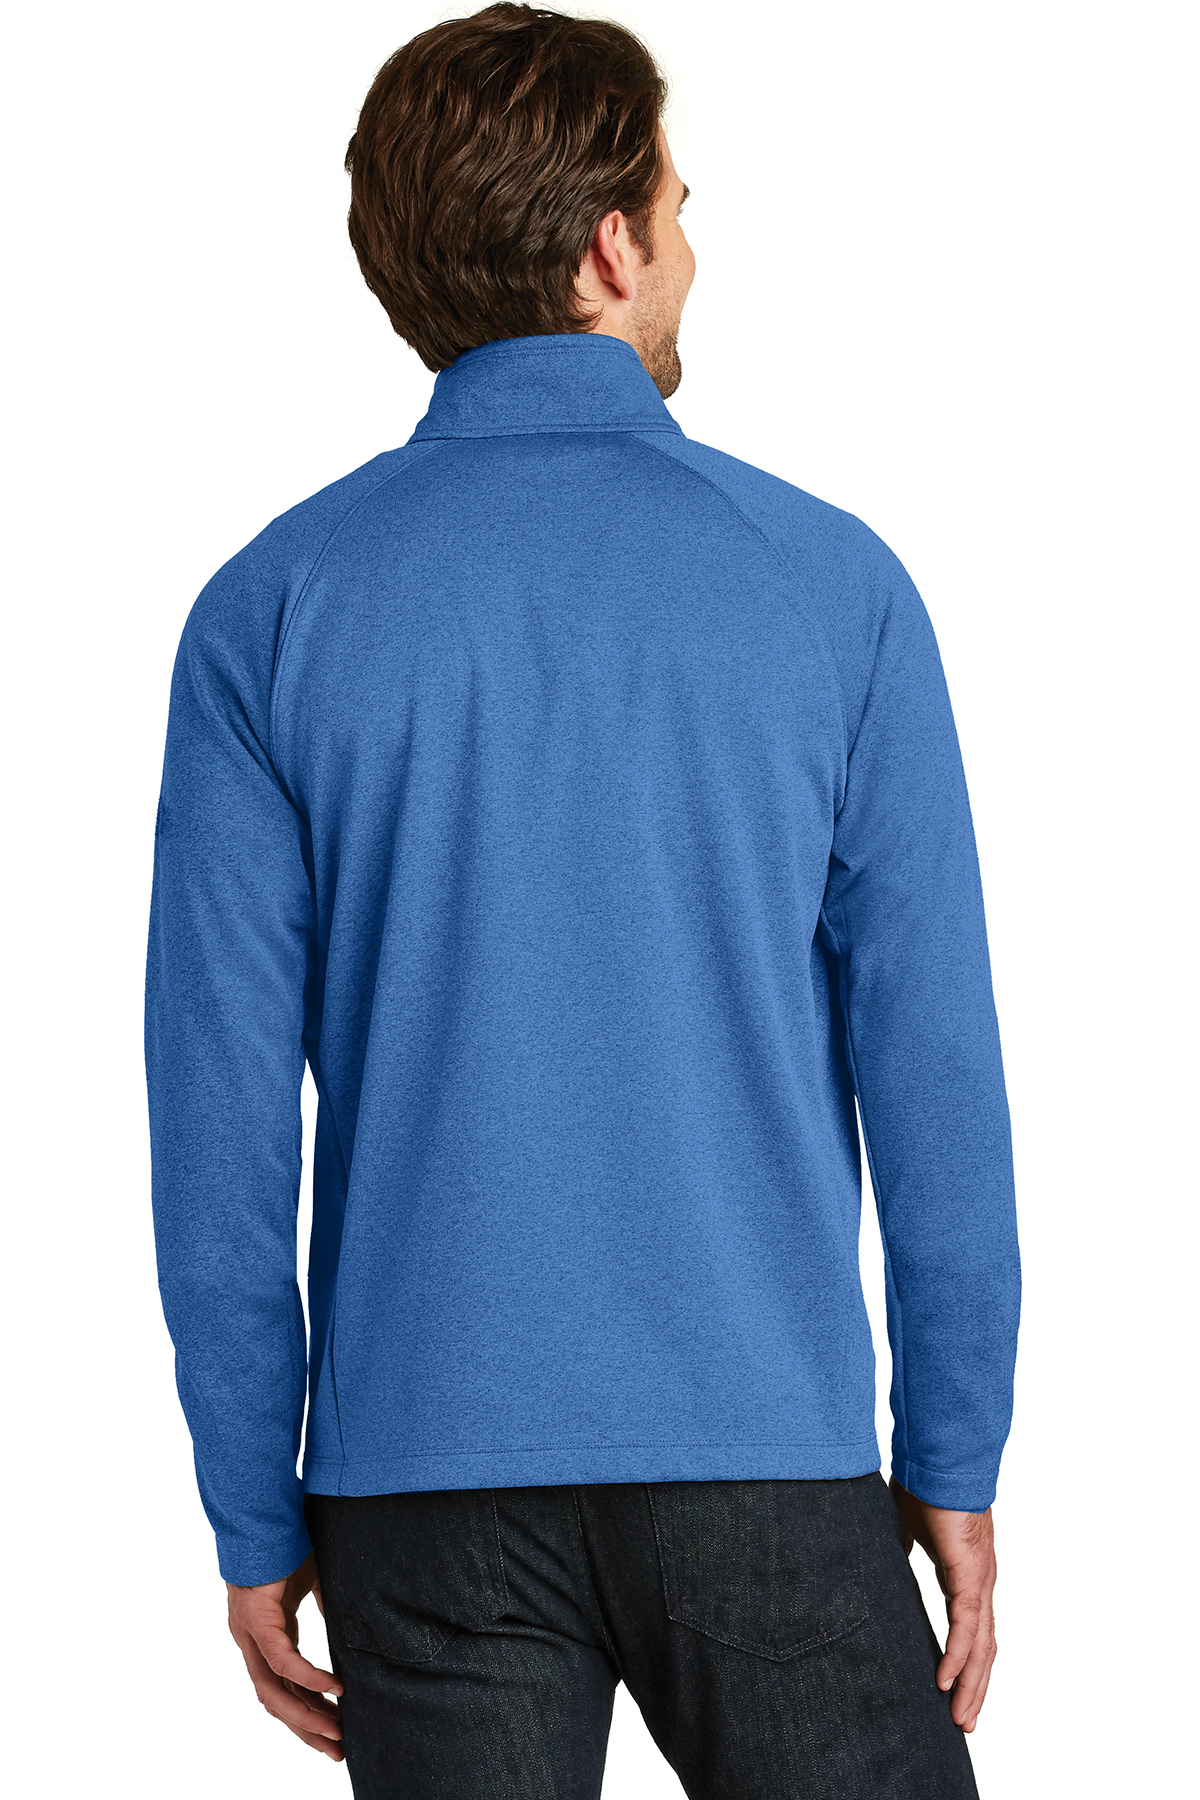 The North Face® Men's Canyon Flats Fleece Jacket – Publix Company Store by  Partner Marketing Group